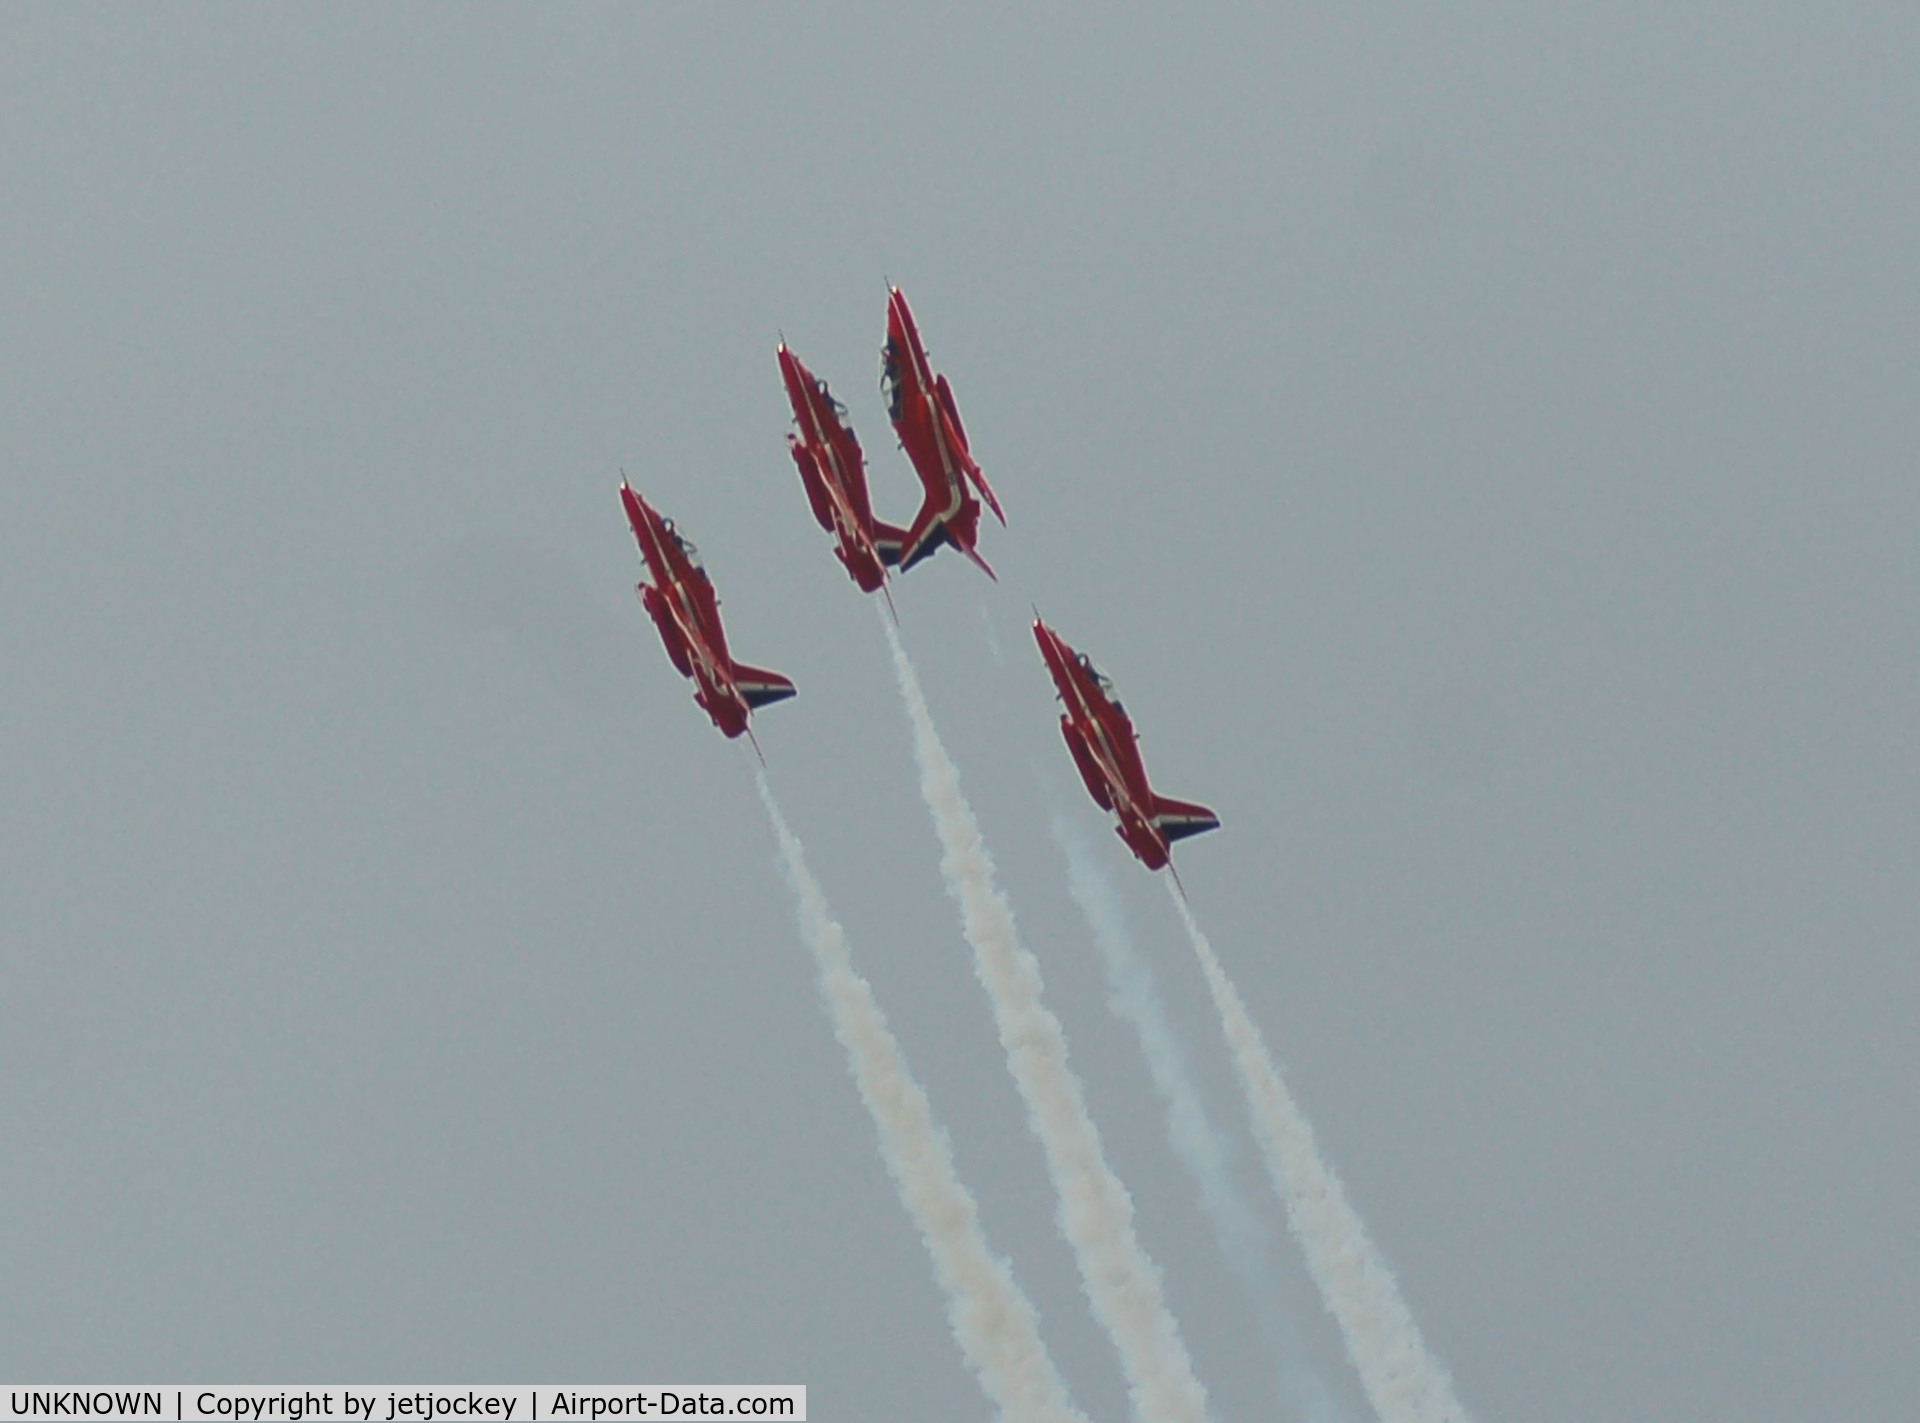 UNKNOWN, British Aerospace Hawk T1A C/N Unknown, Red Arrows Gipo 4 in mirror formation Southport Air Show 2007